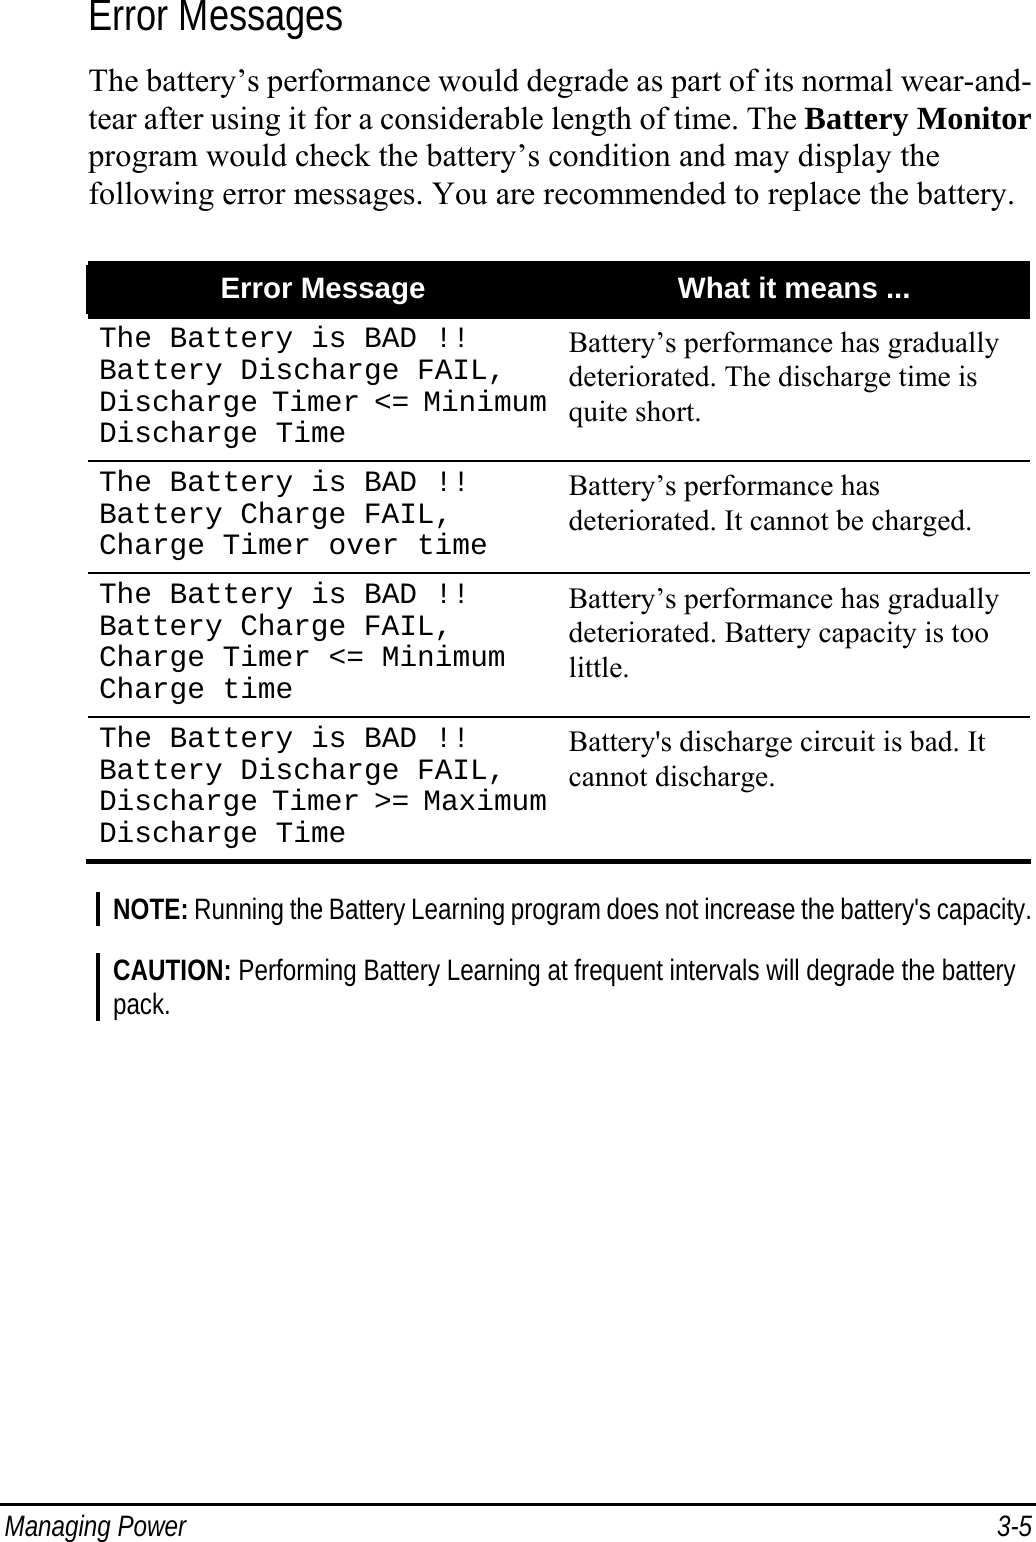  Managing Power  3-5 Error Messages The battery’s performance would degrade as part of its normal wear-and- tear after using it for a considerable length of time. The Battery Monitor program would check the battery’s condition and may display the following error messages. You are recommended to replace the battery.  Error Message  What it means ... The Battery is BAD !! Battery Discharge FAIL, Discharge Timer &lt;= Minimum Discharge Time Battery’s performance has gradually deteriorated. The discharge time is quite short. The Battery is BAD !! Battery Charge FAIL, Charge Timer over time Battery’s performance has deteriorated. It cannot be charged. The Battery is BAD !! Battery Charge FAIL, Charge Timer &lt;= Minimum Charge time Battery’s performance has gradually deteriorated. Battery capacity is too little. The Battery is BAD !! Battery Discharge FAIL, Discharge Timer &gt;= Maximum Discharge Time Battery&apos;s discharge circuit is bad. It cannot discharge.  NOTE: Running the Battery Learning program does not increase the battery&apos;s capacity.  CAUTION: Performing Battery Learning at frequent intervals will degrade the battery pack.  